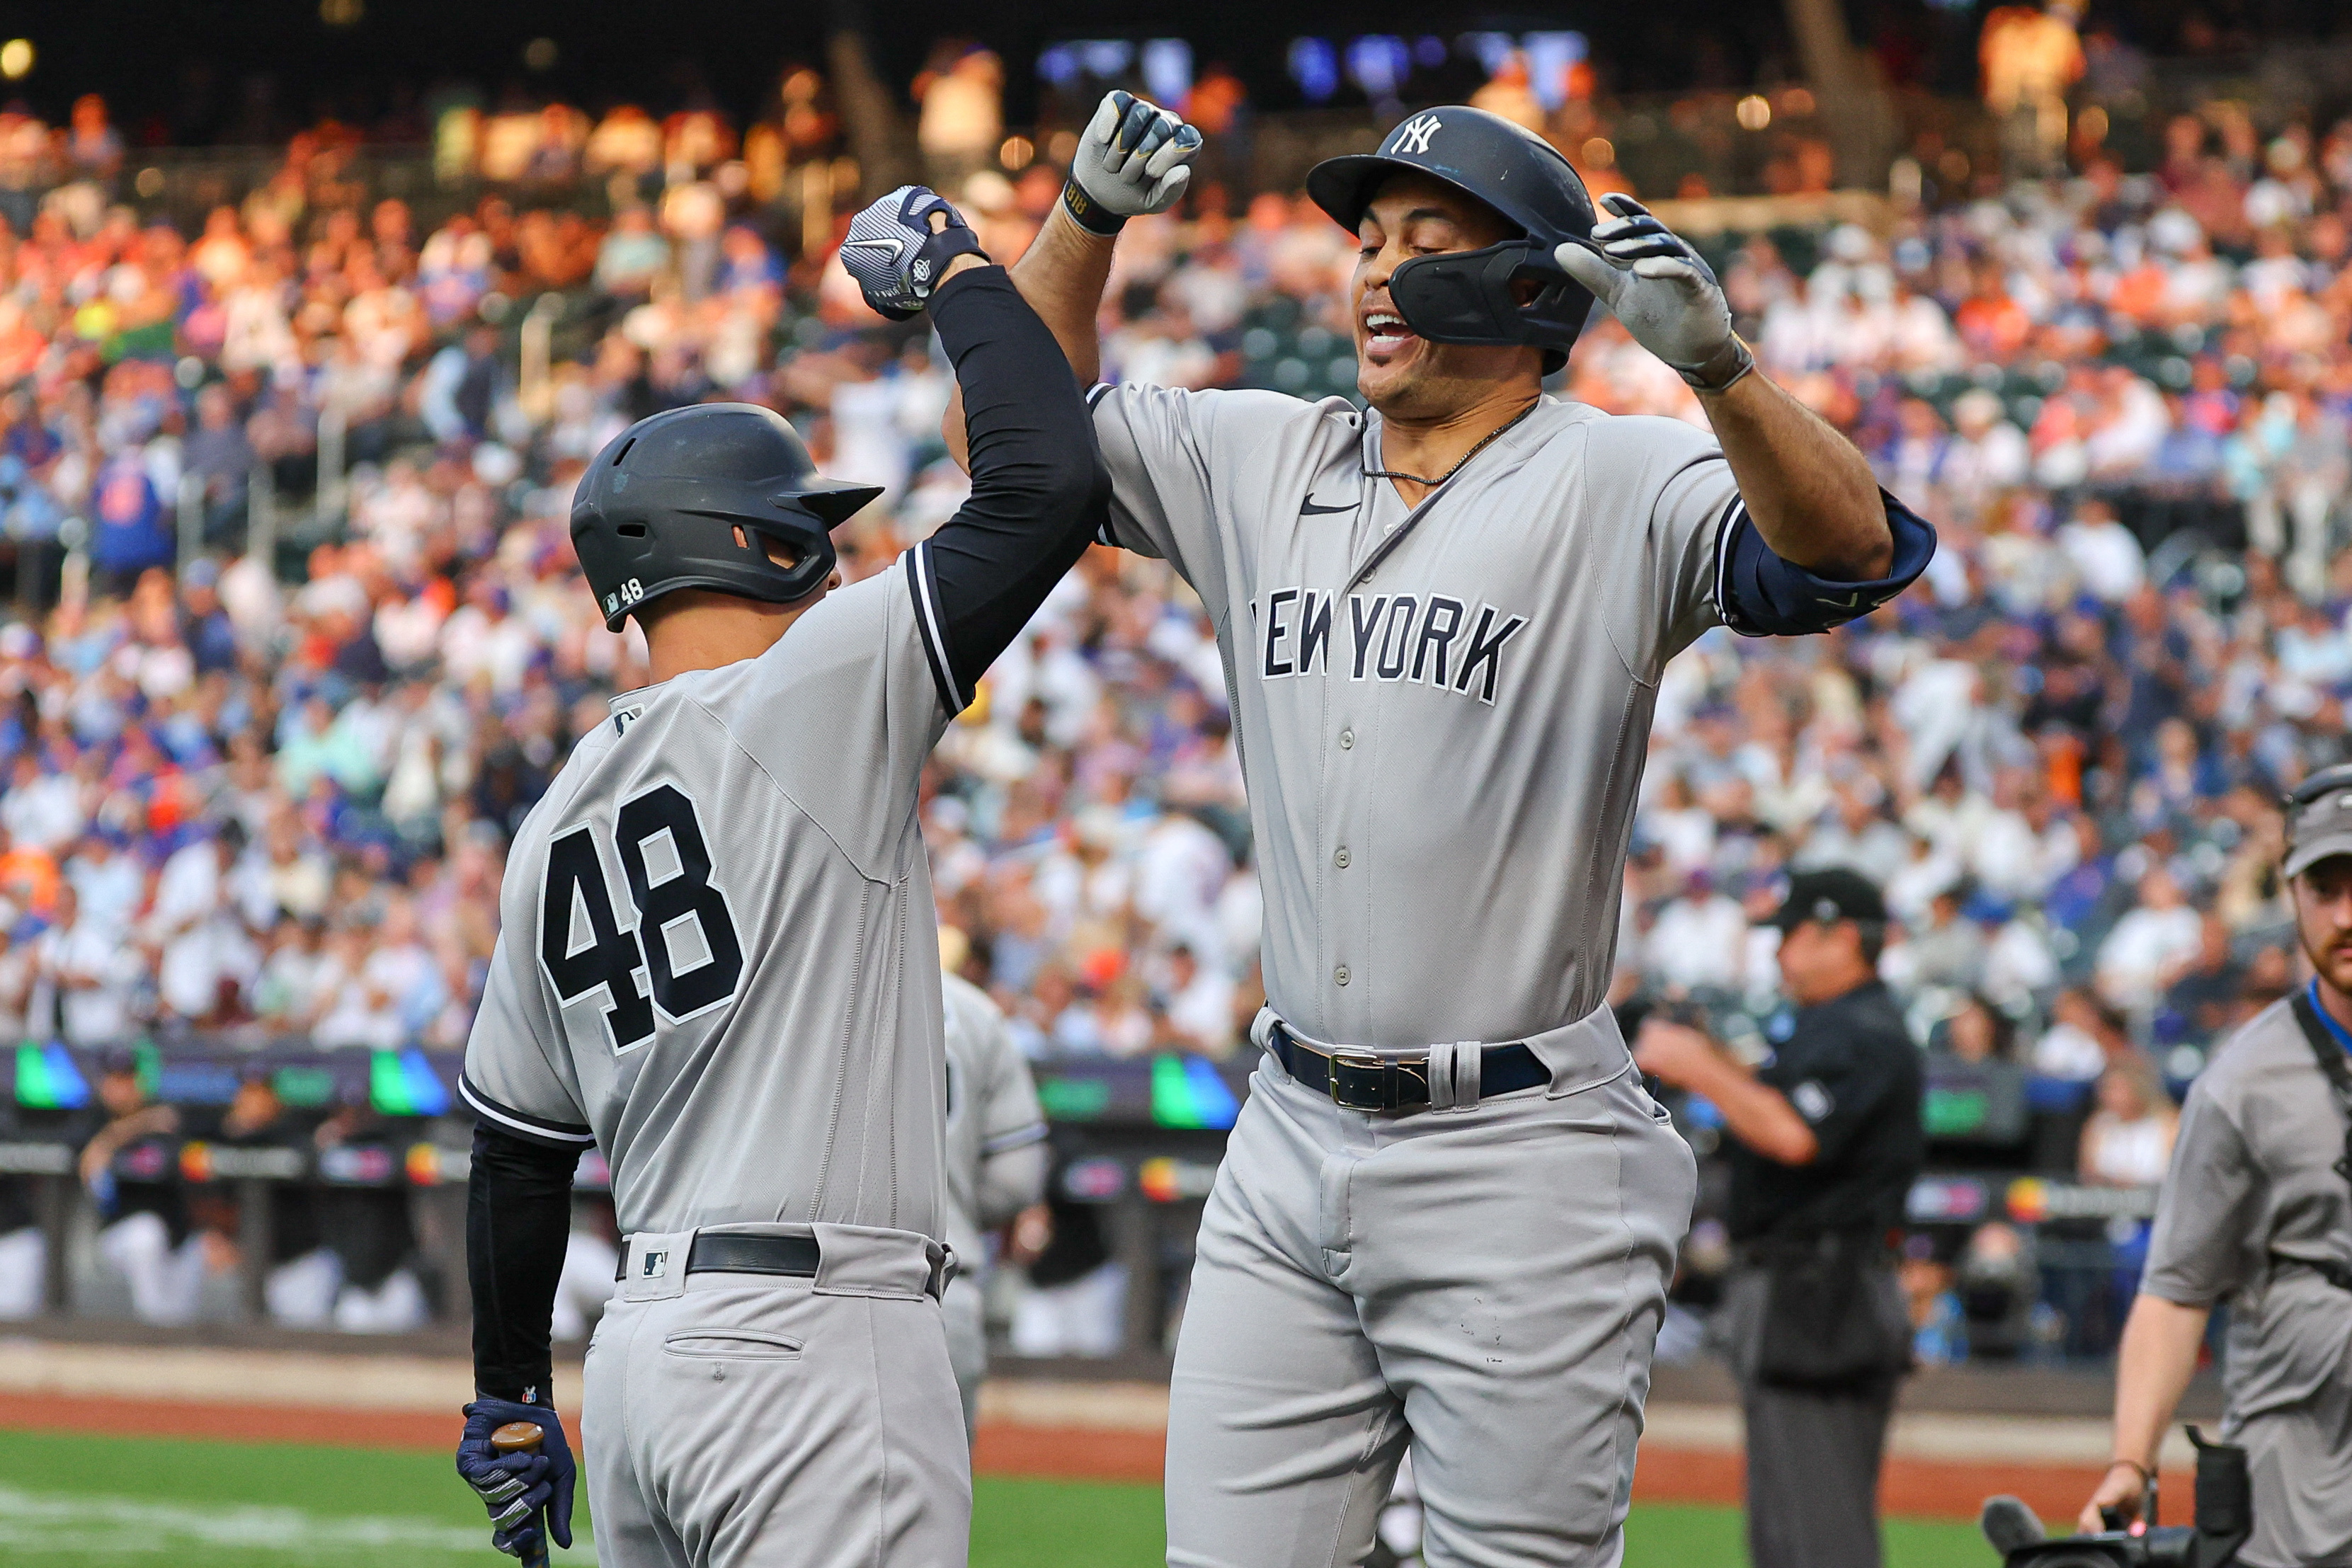 Yankees come back to beat Mets in season's first meeting